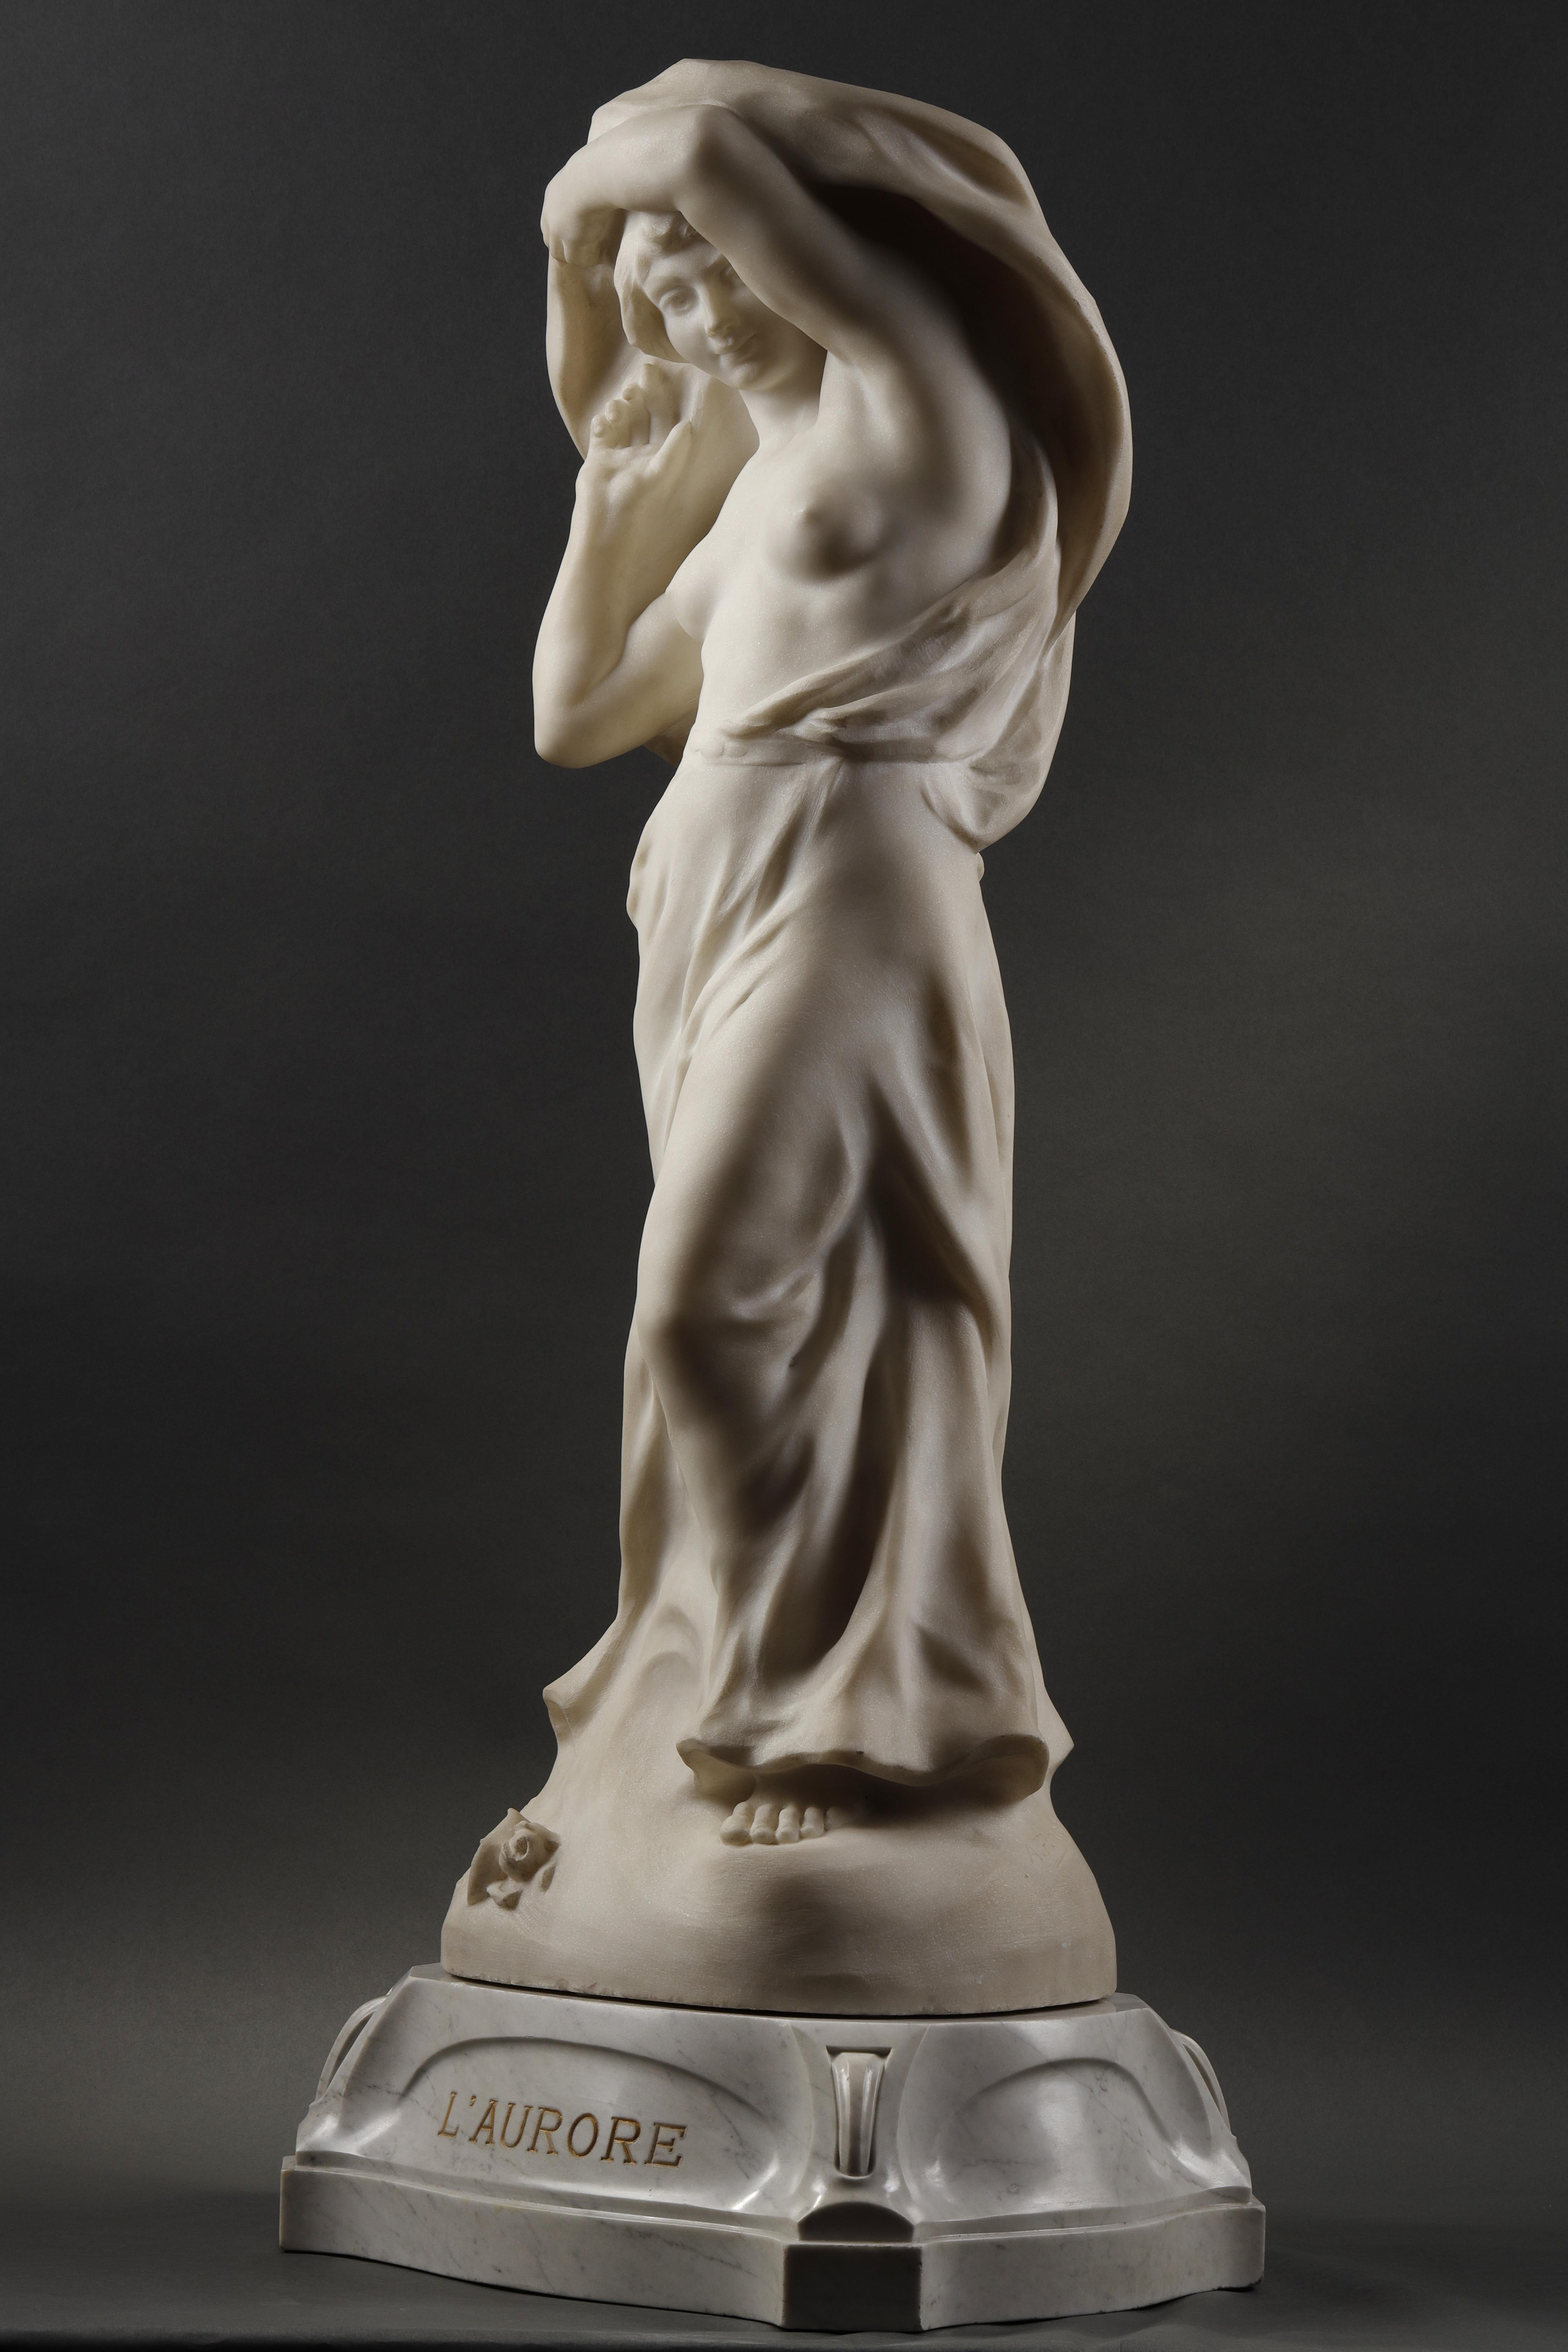 Title : 				L'Aurore (The Dawn)

		The sculpture depicts a smiling woman getting up in the morning.  The artist chose to detail only the anatomical parts of the woman, her hands, her feet, her face and her chest, while he left vague the features of